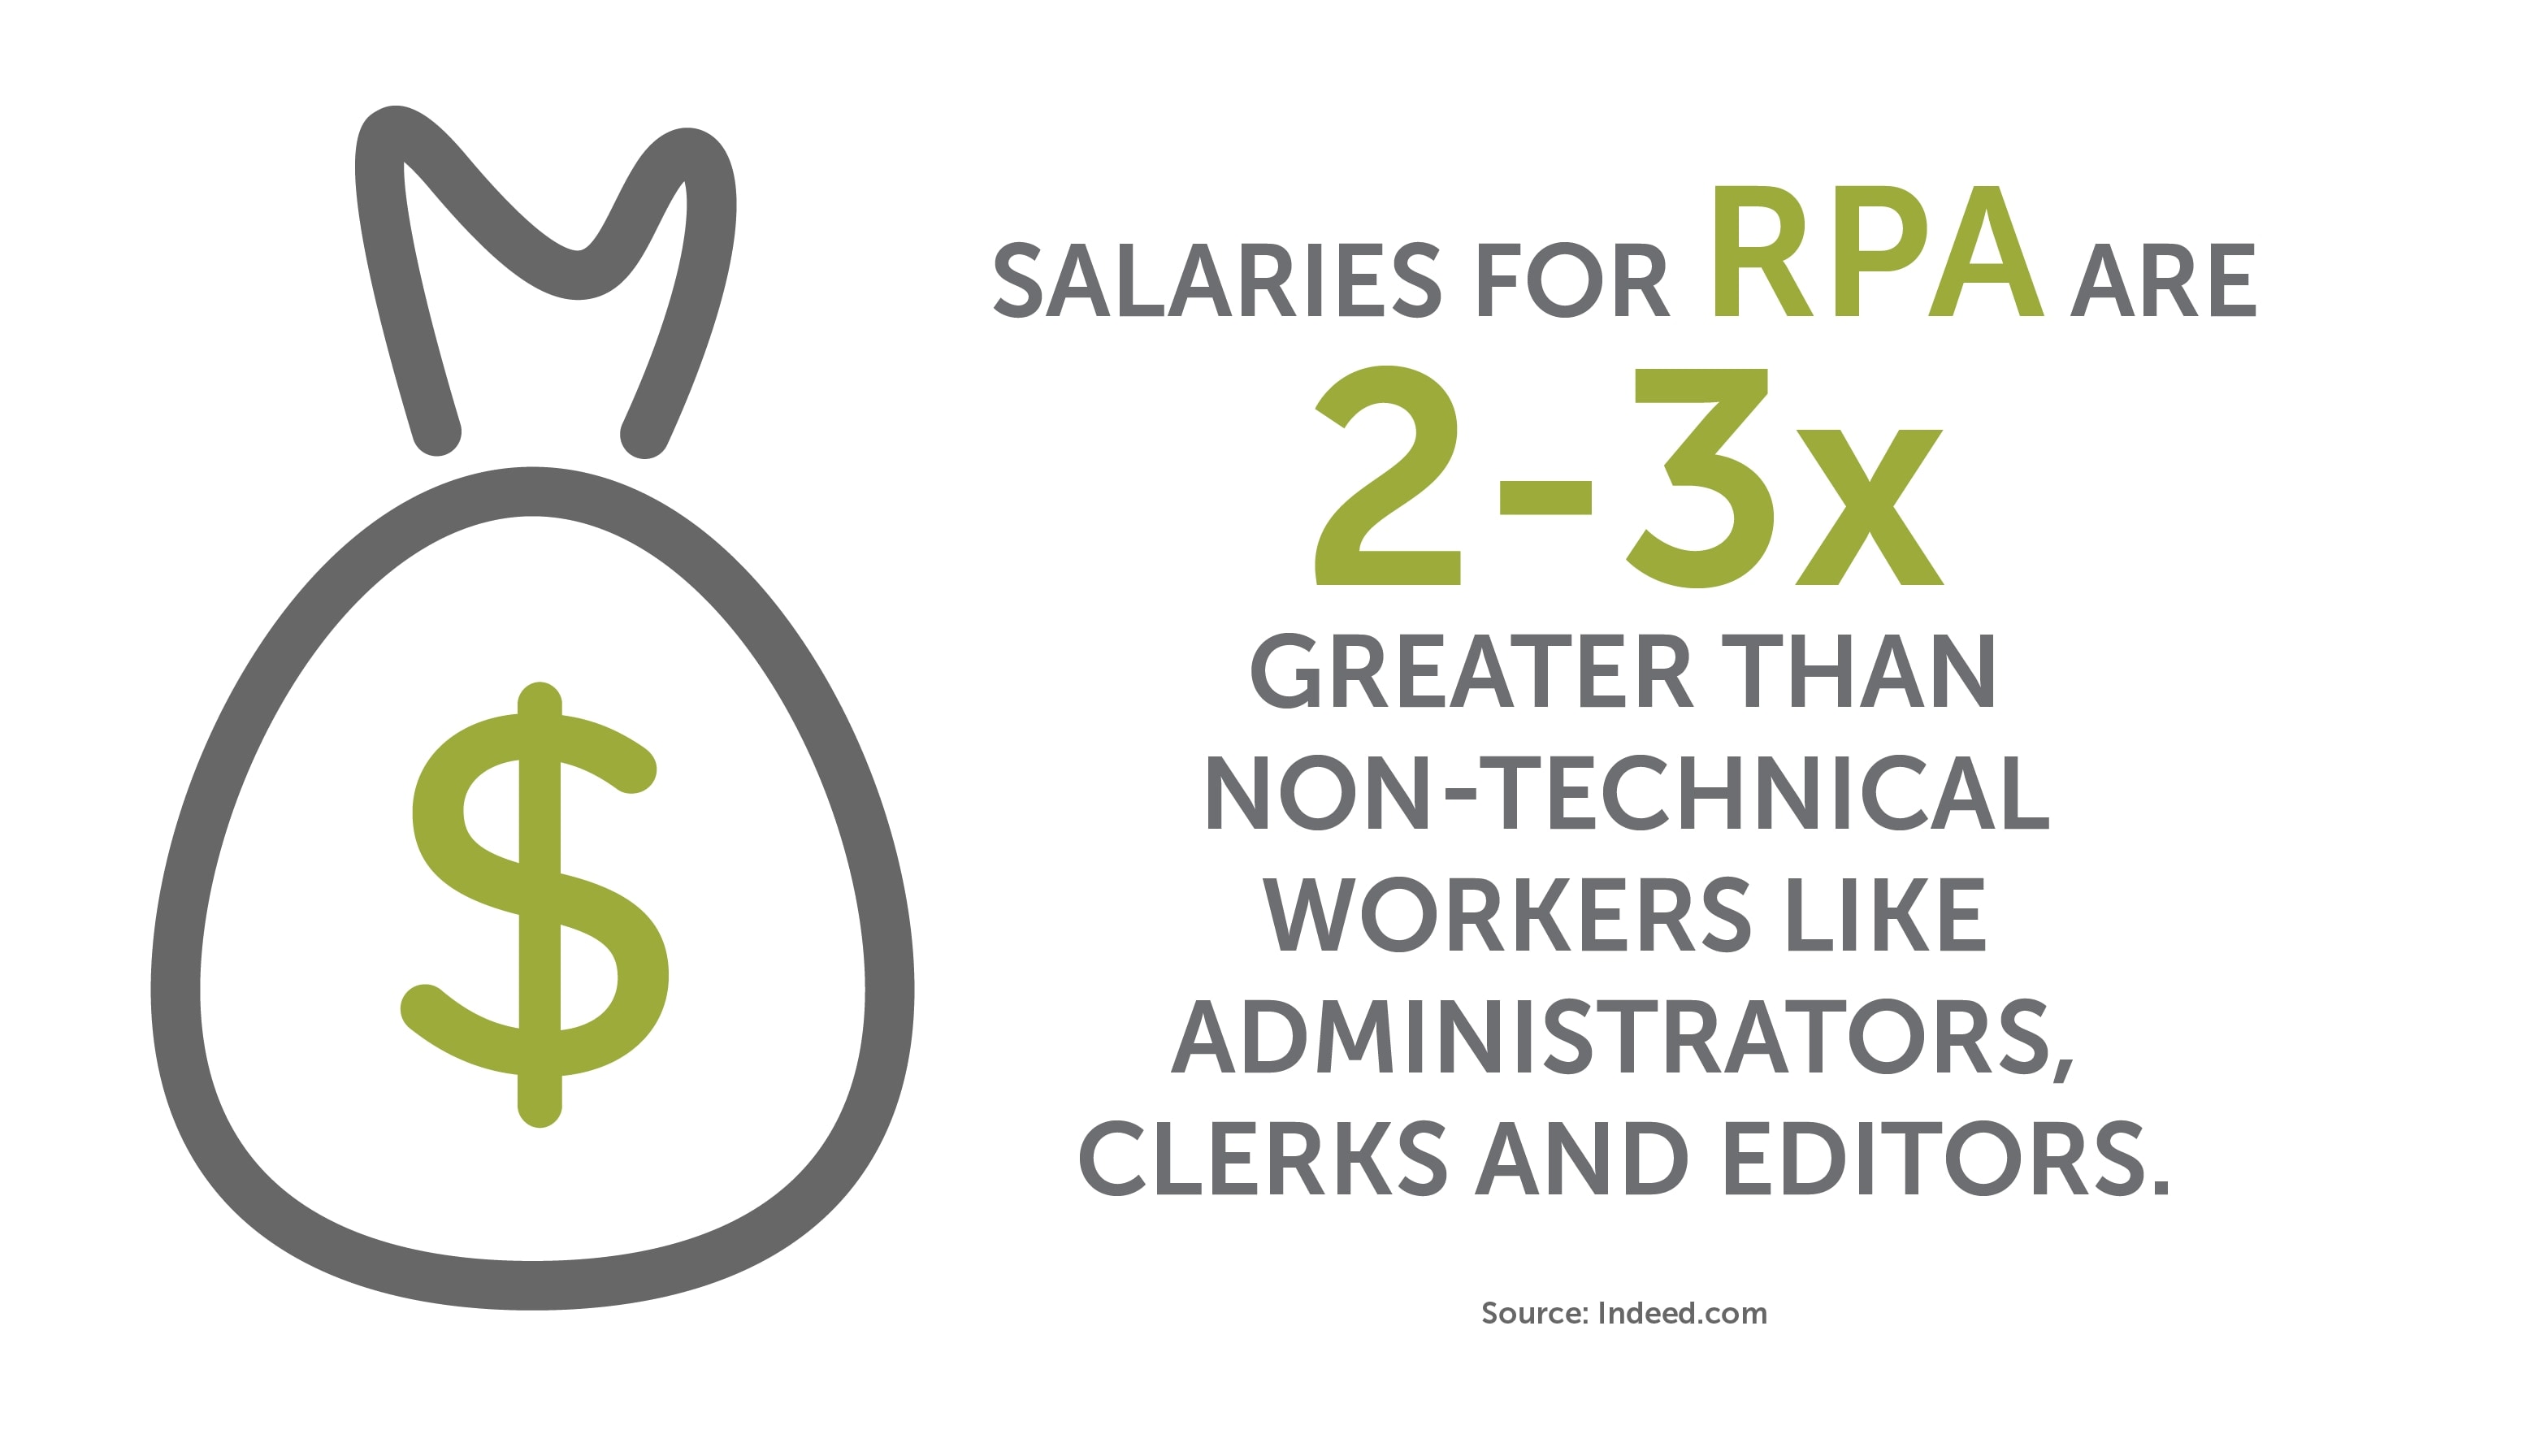 Salaries for RPA are 2 to 3 times greater than those for nontechnical workers, according to Indeed.com.